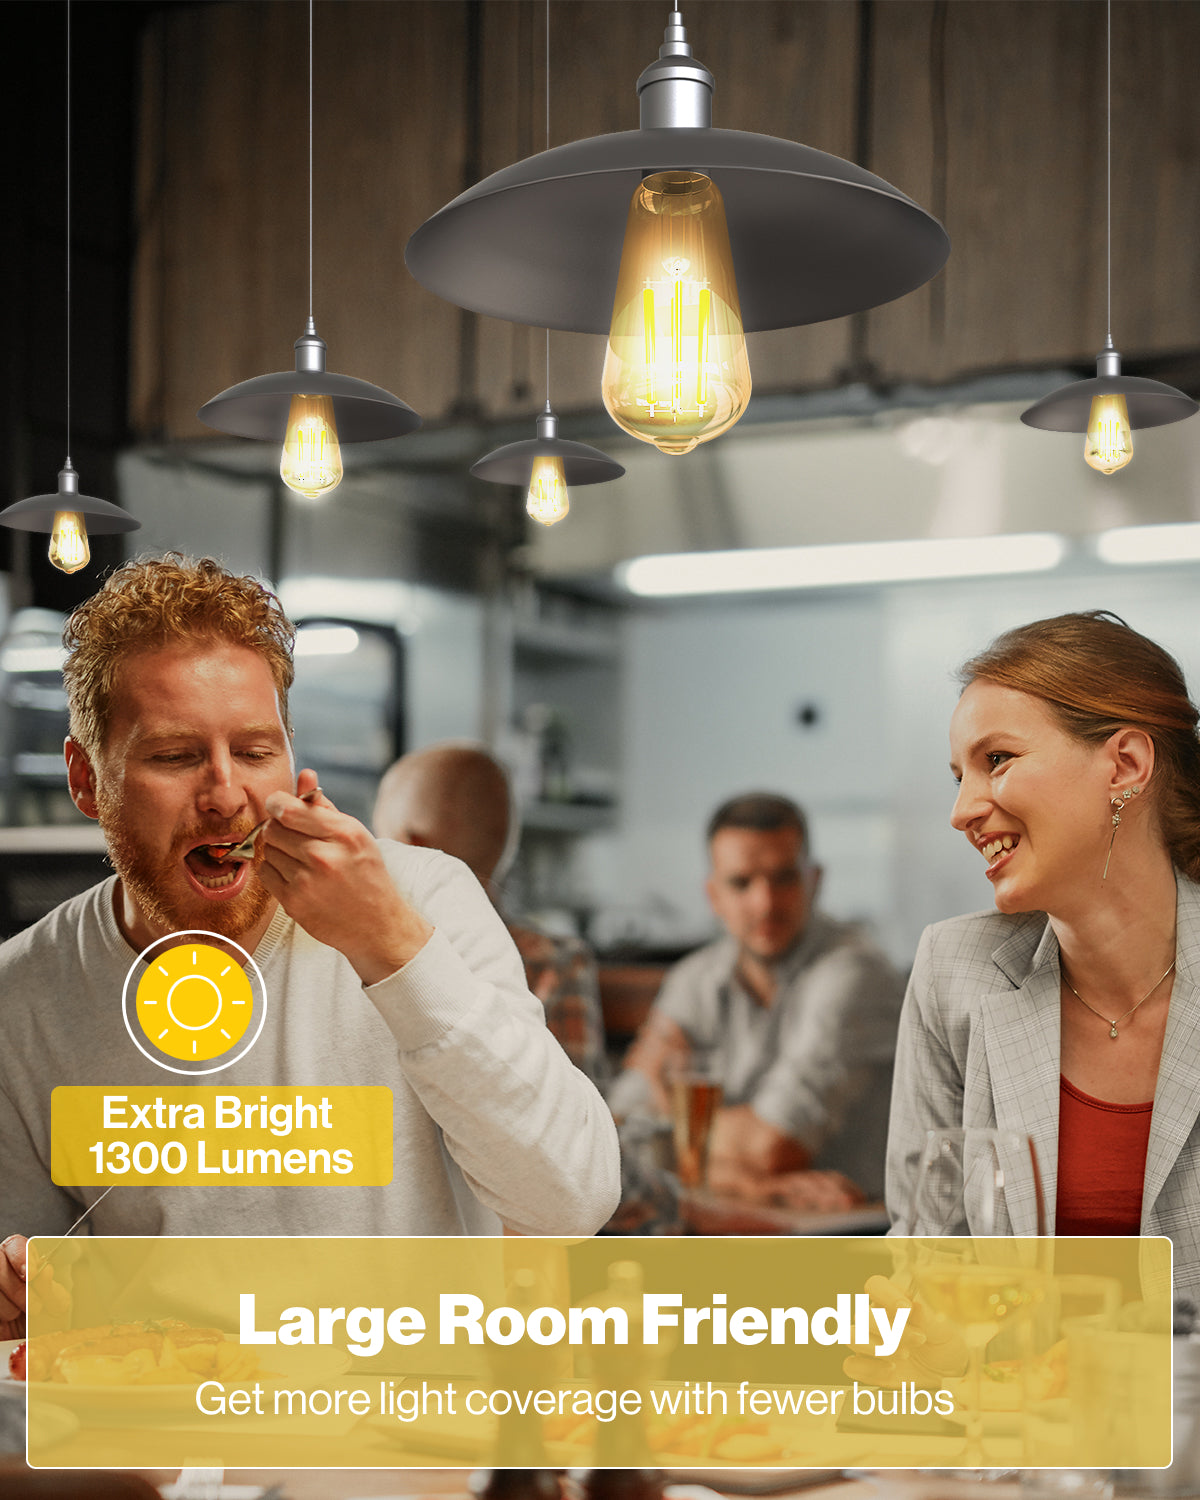 With its Edison-style filament, the ultra-bright bulbs add a classic touch to bathrooms, kitchens, dining rooms, common spaces, and more.